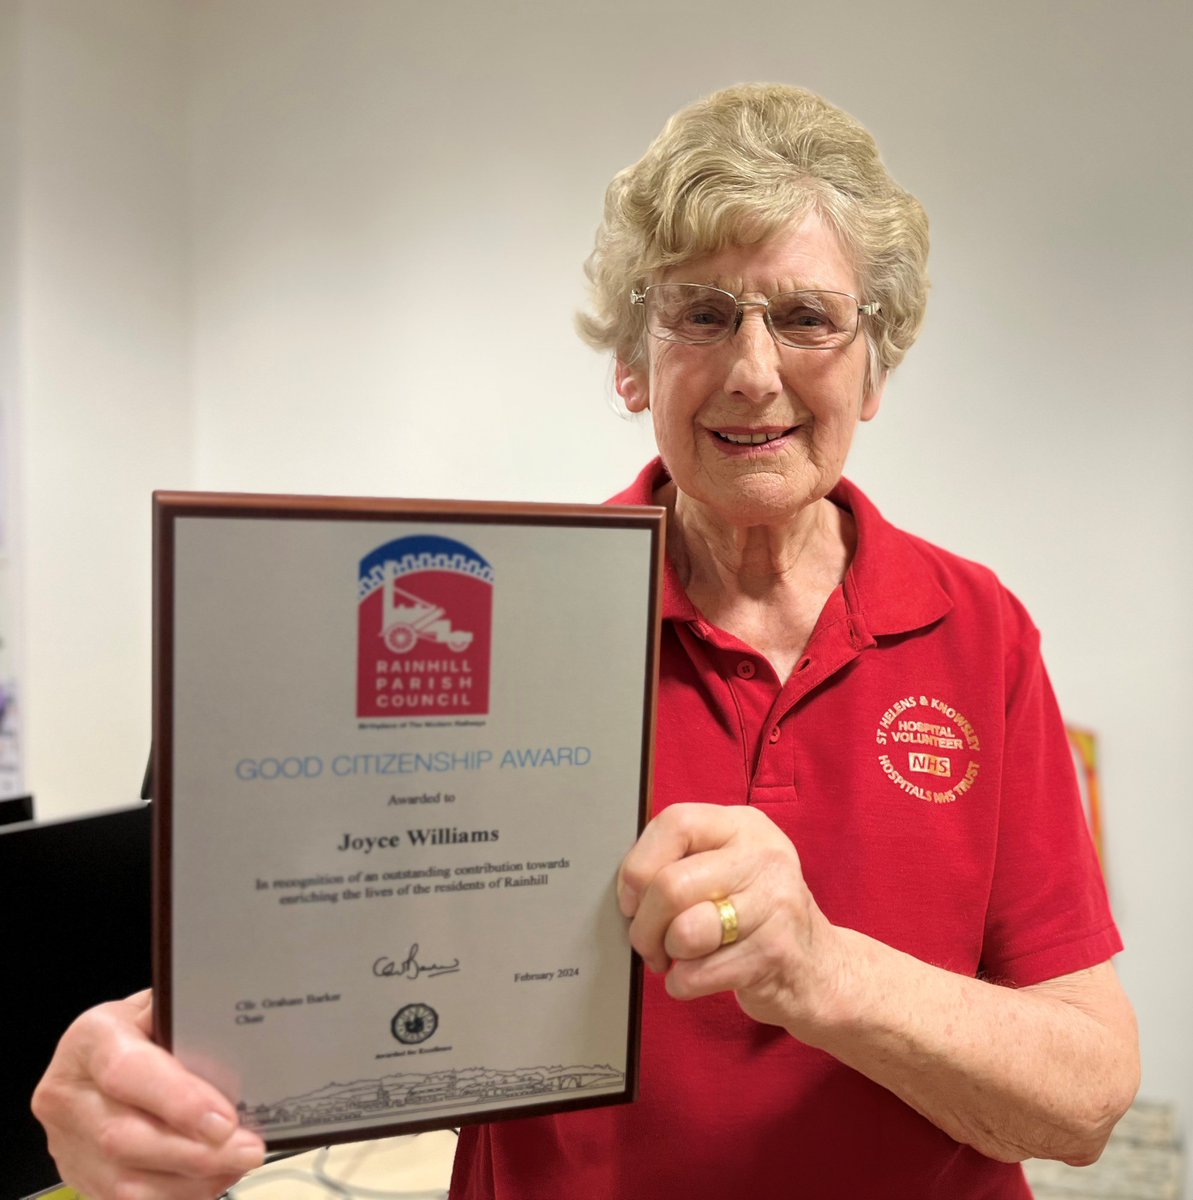 Joyce Williams, who has given up her time to be a volunteer at Whiston Hospital for the past 10 years, has been presented with a Good Citizenship Award by the Rainhill Parish Council!👏 Congratulations Joyce, we're proud to have you as part of the team😊